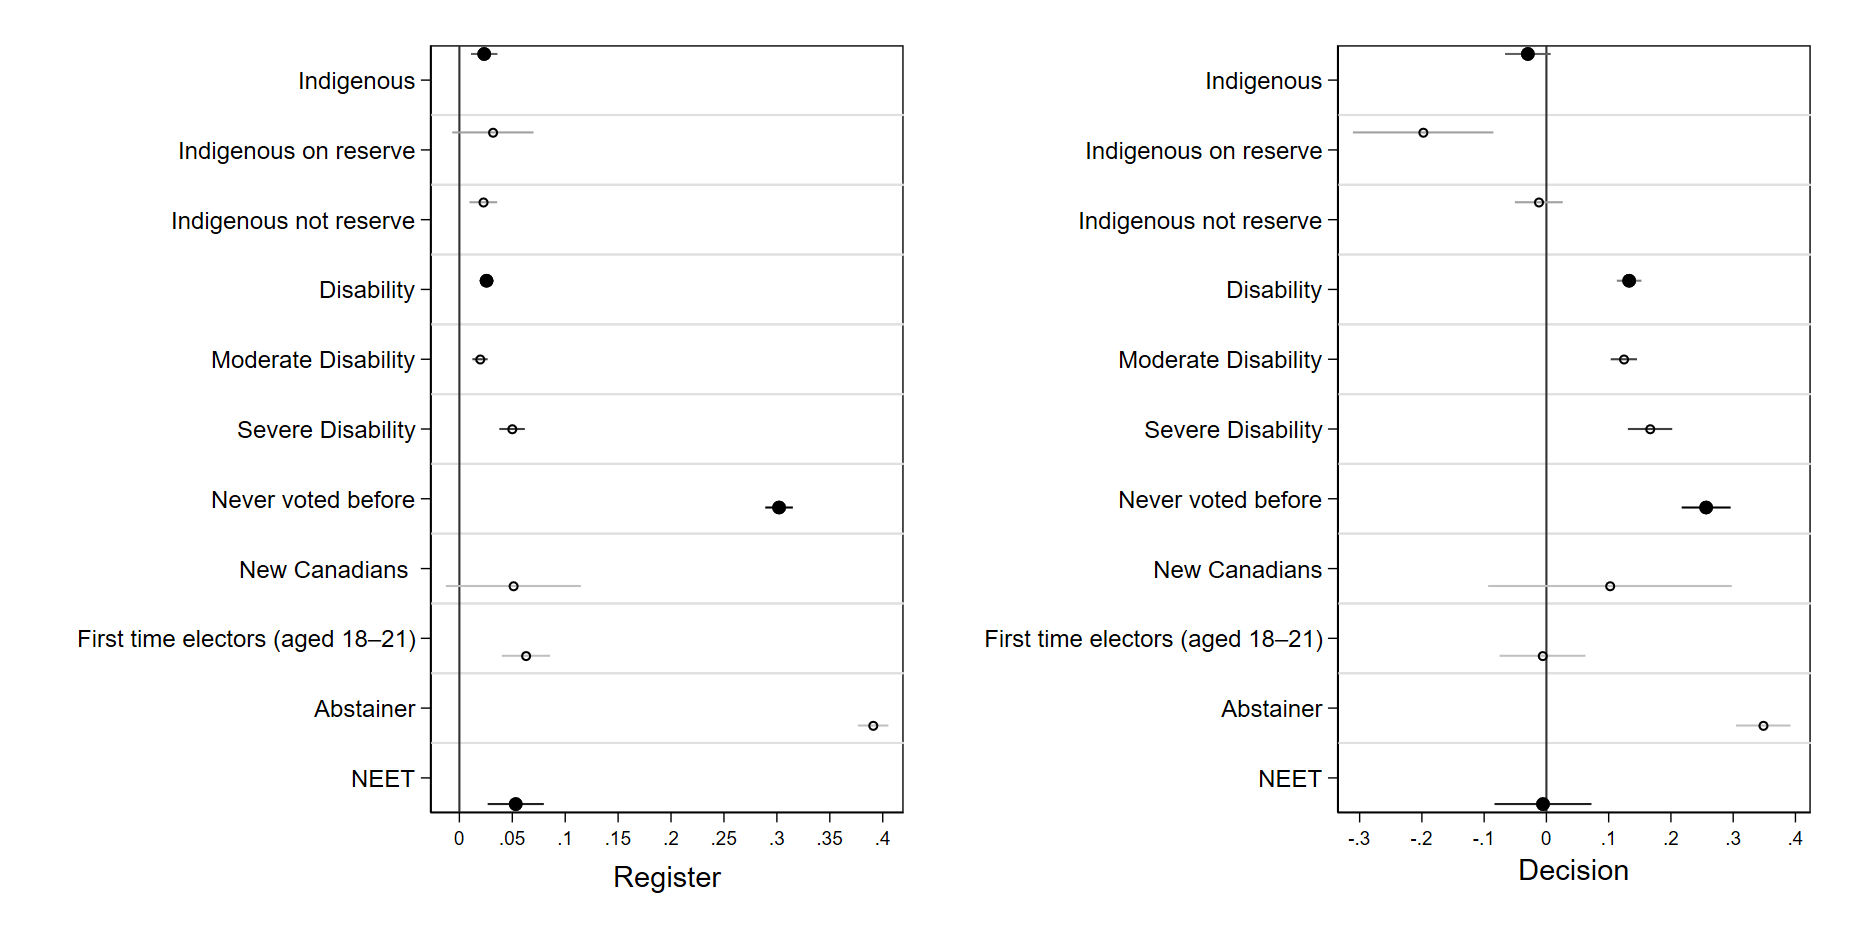 Figure 4.3. How much higher (or lower) are the perceived burdens in various groups, controlling for socio-demographic characteristics: registration and decision